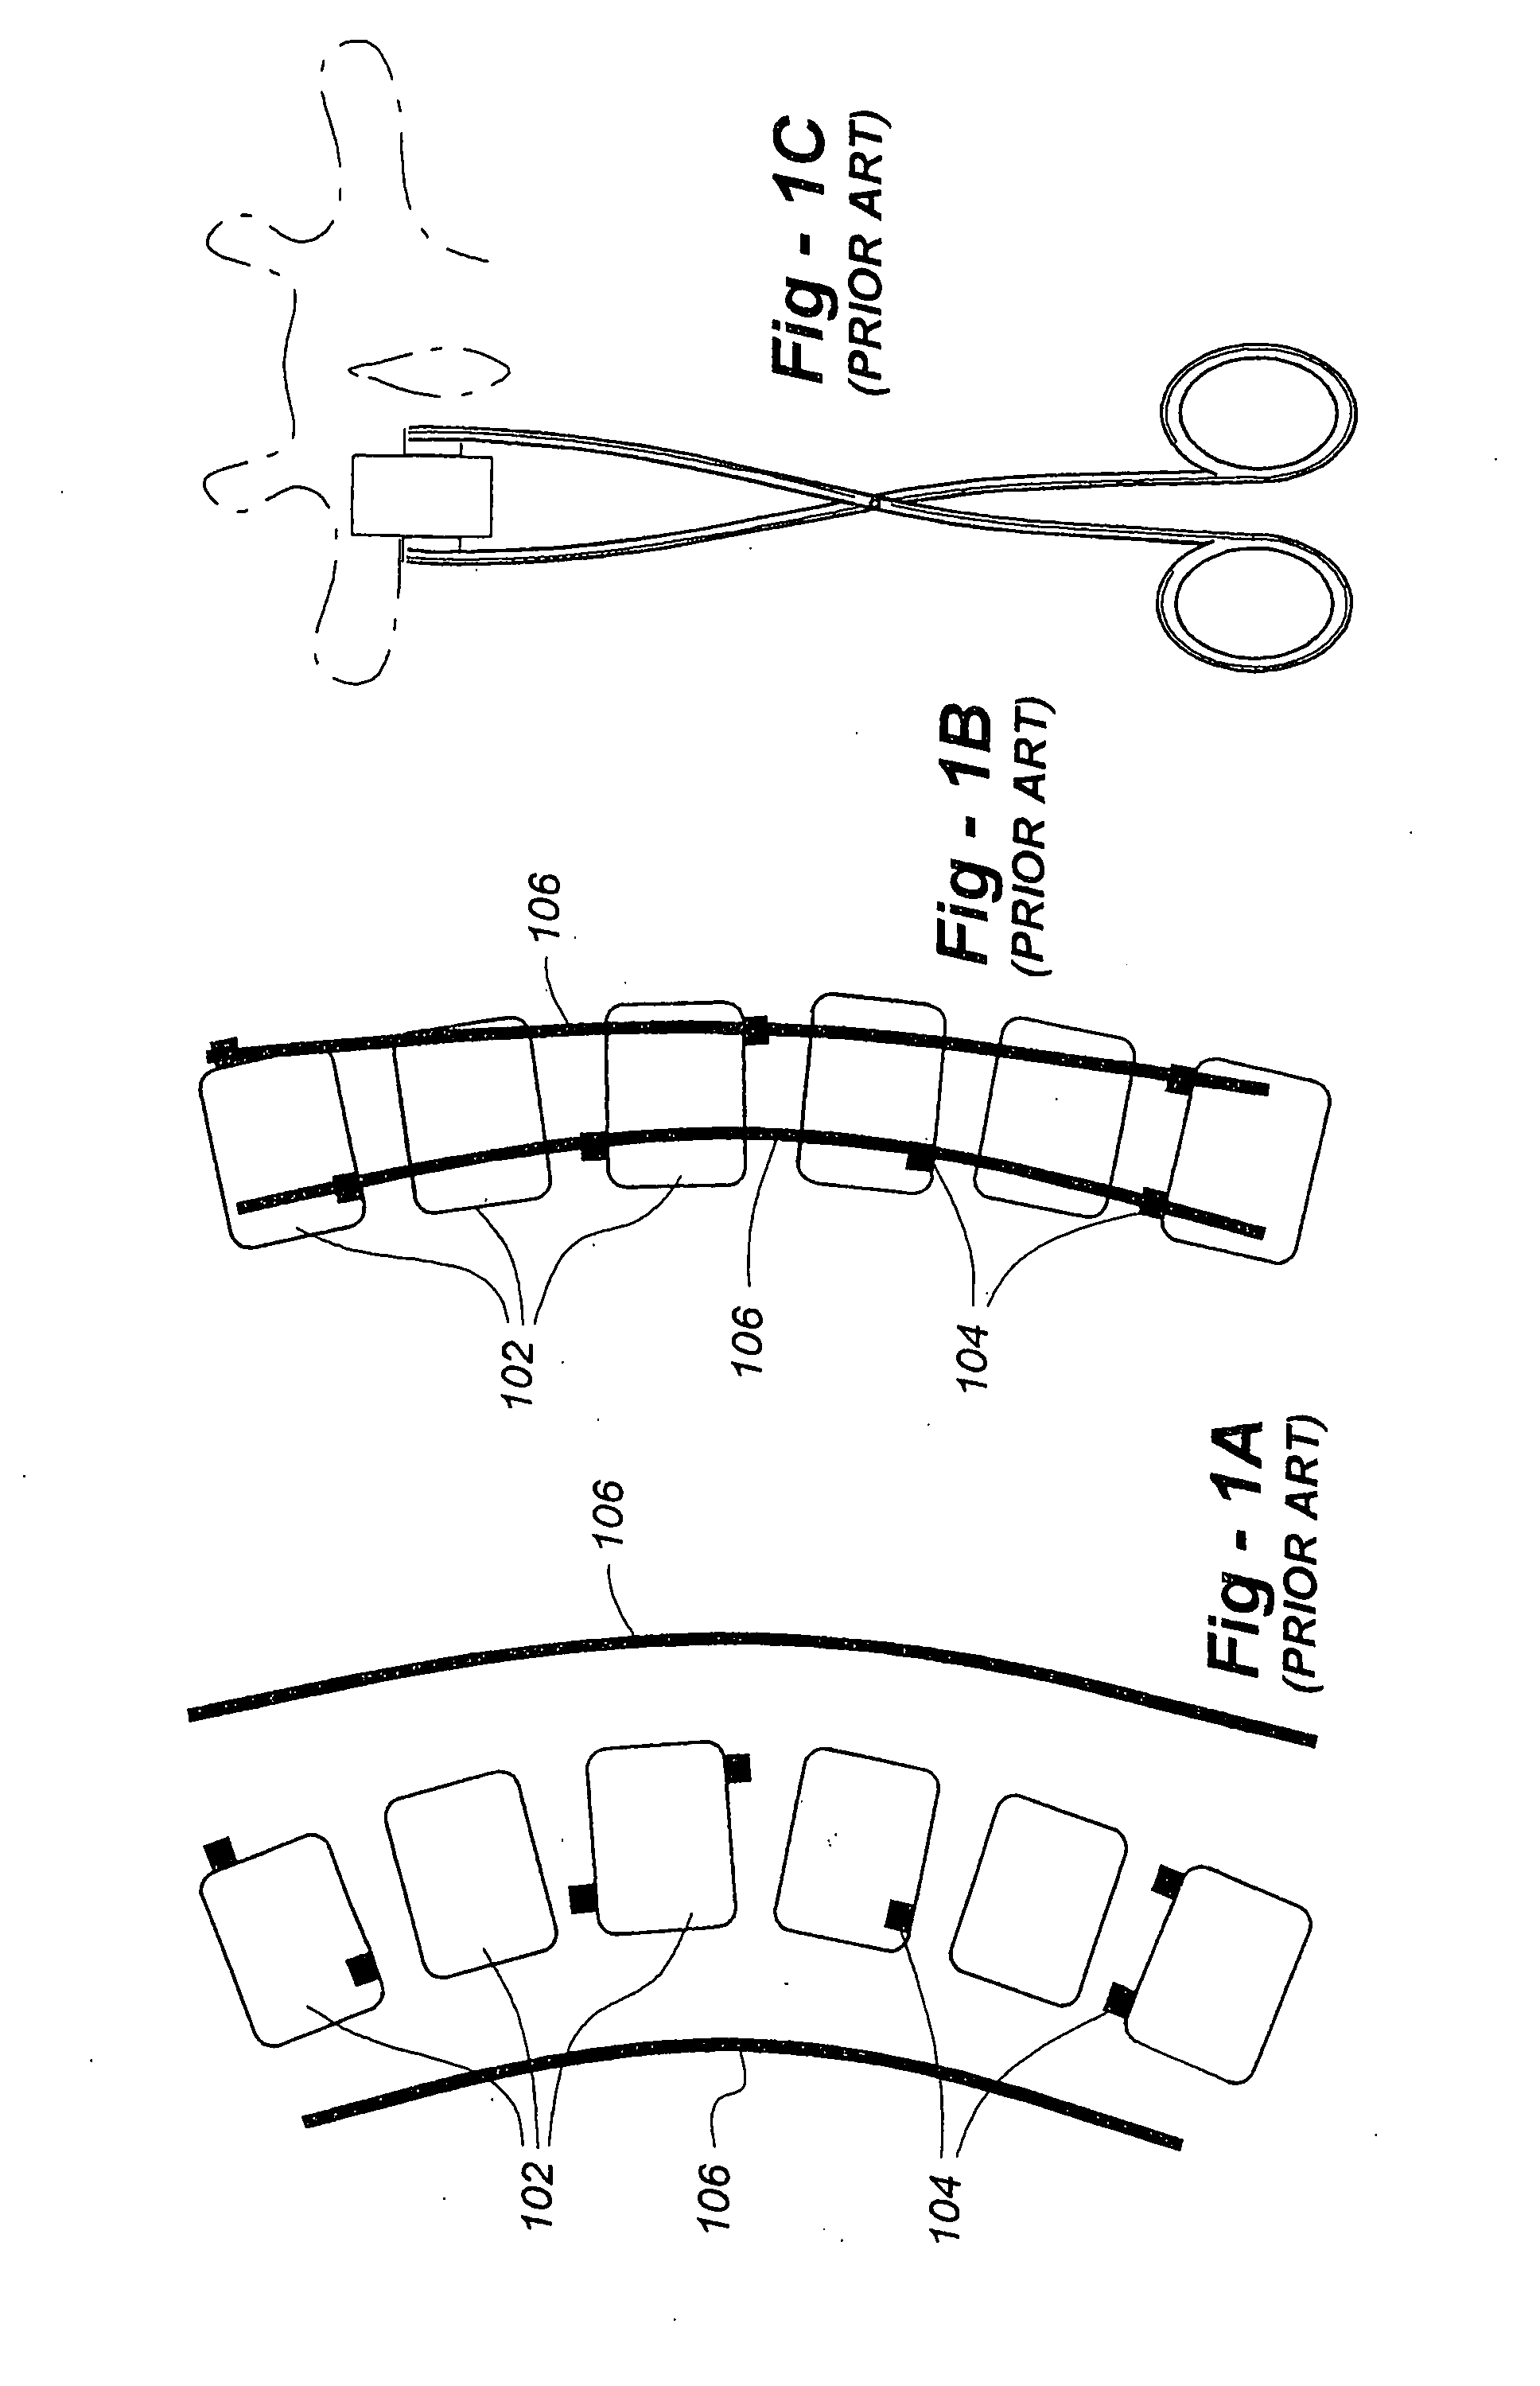 Spinal alignment system and related methods